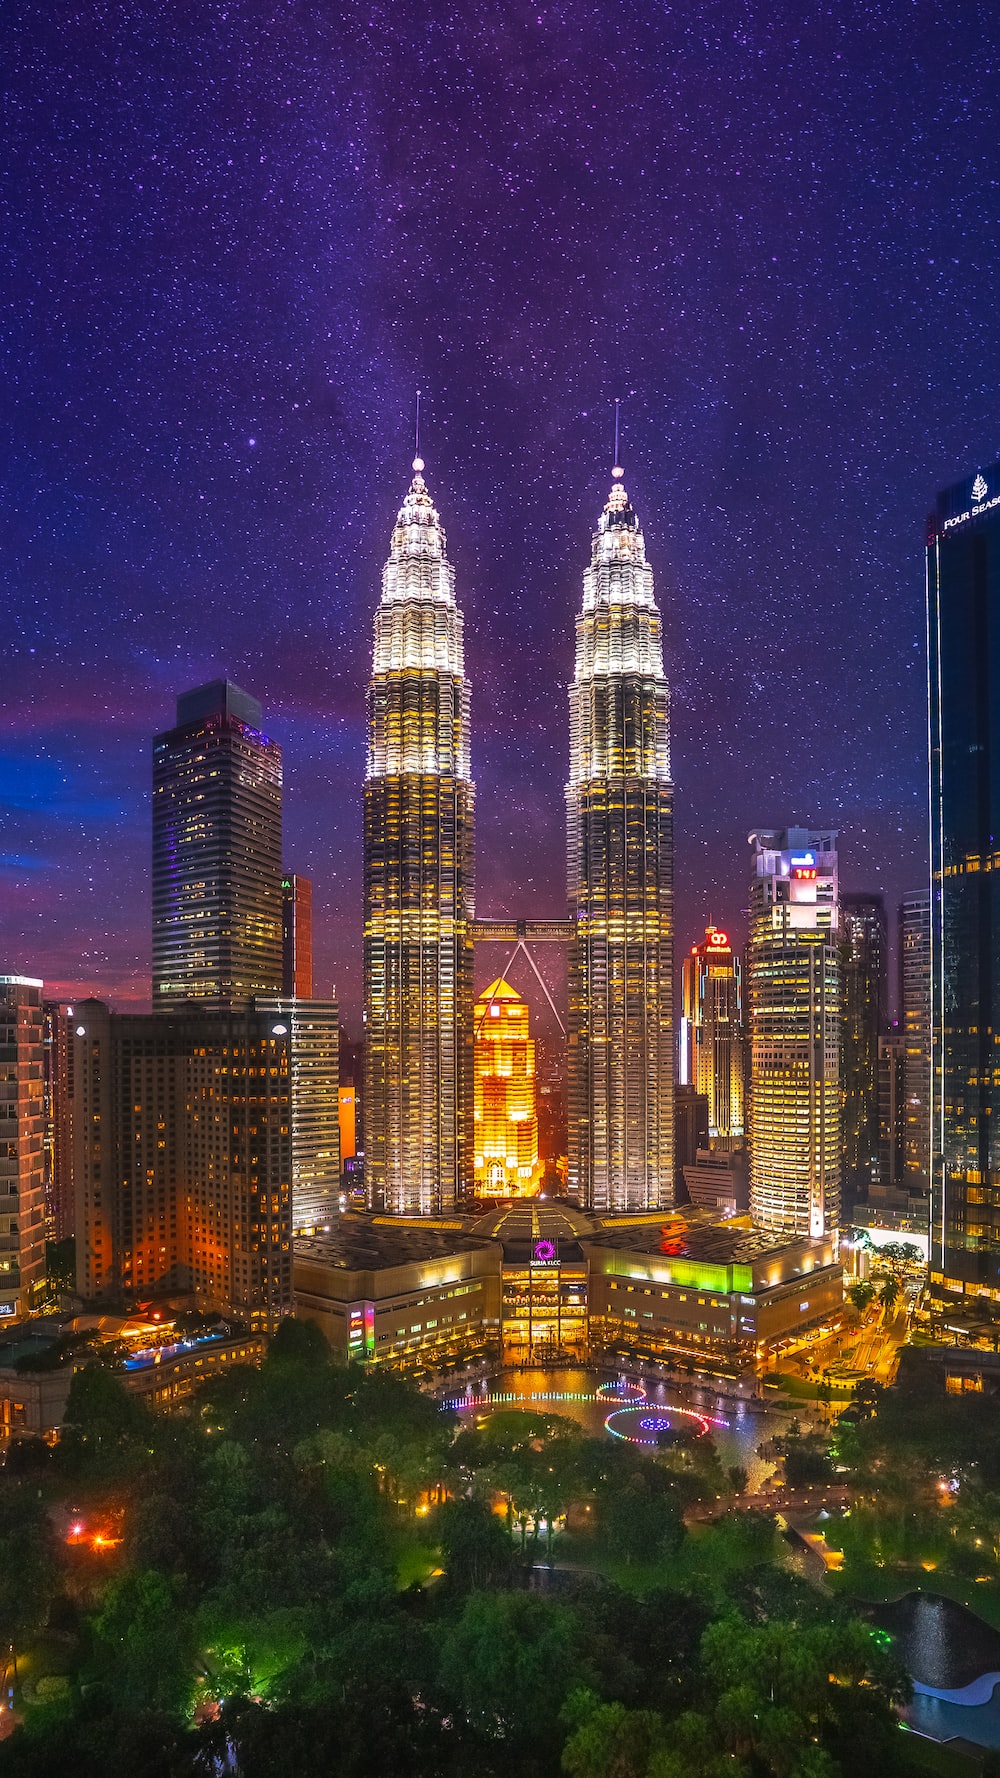 Kuala lumpur pictures hd download free images on